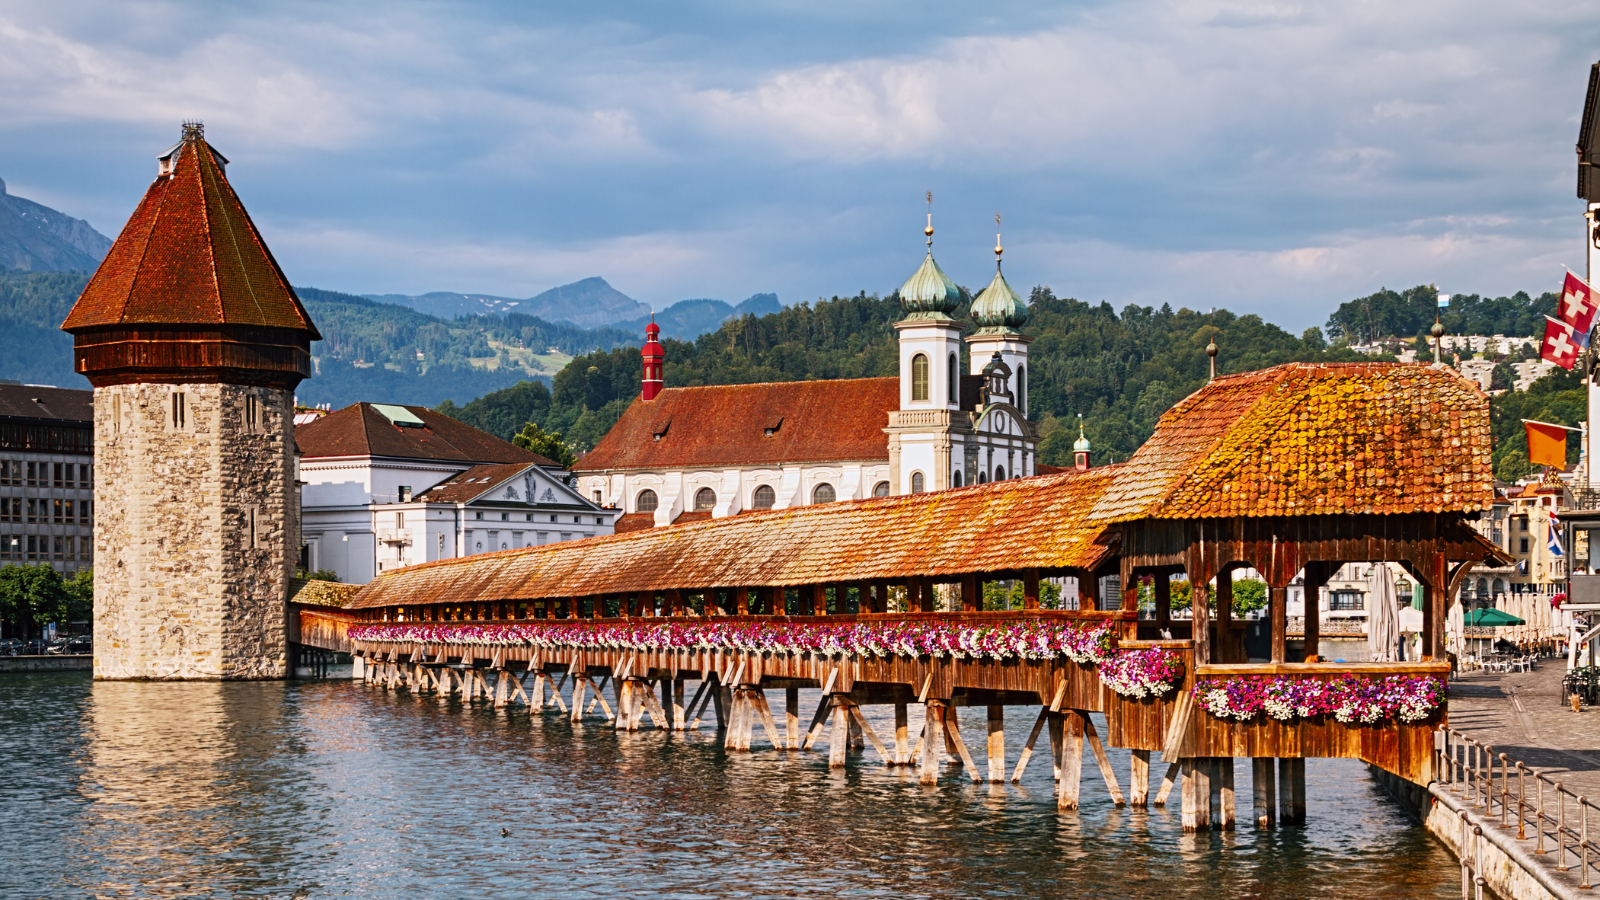 The second thing in the list of 10 best things to do in Switzerland - Explore Lucerne